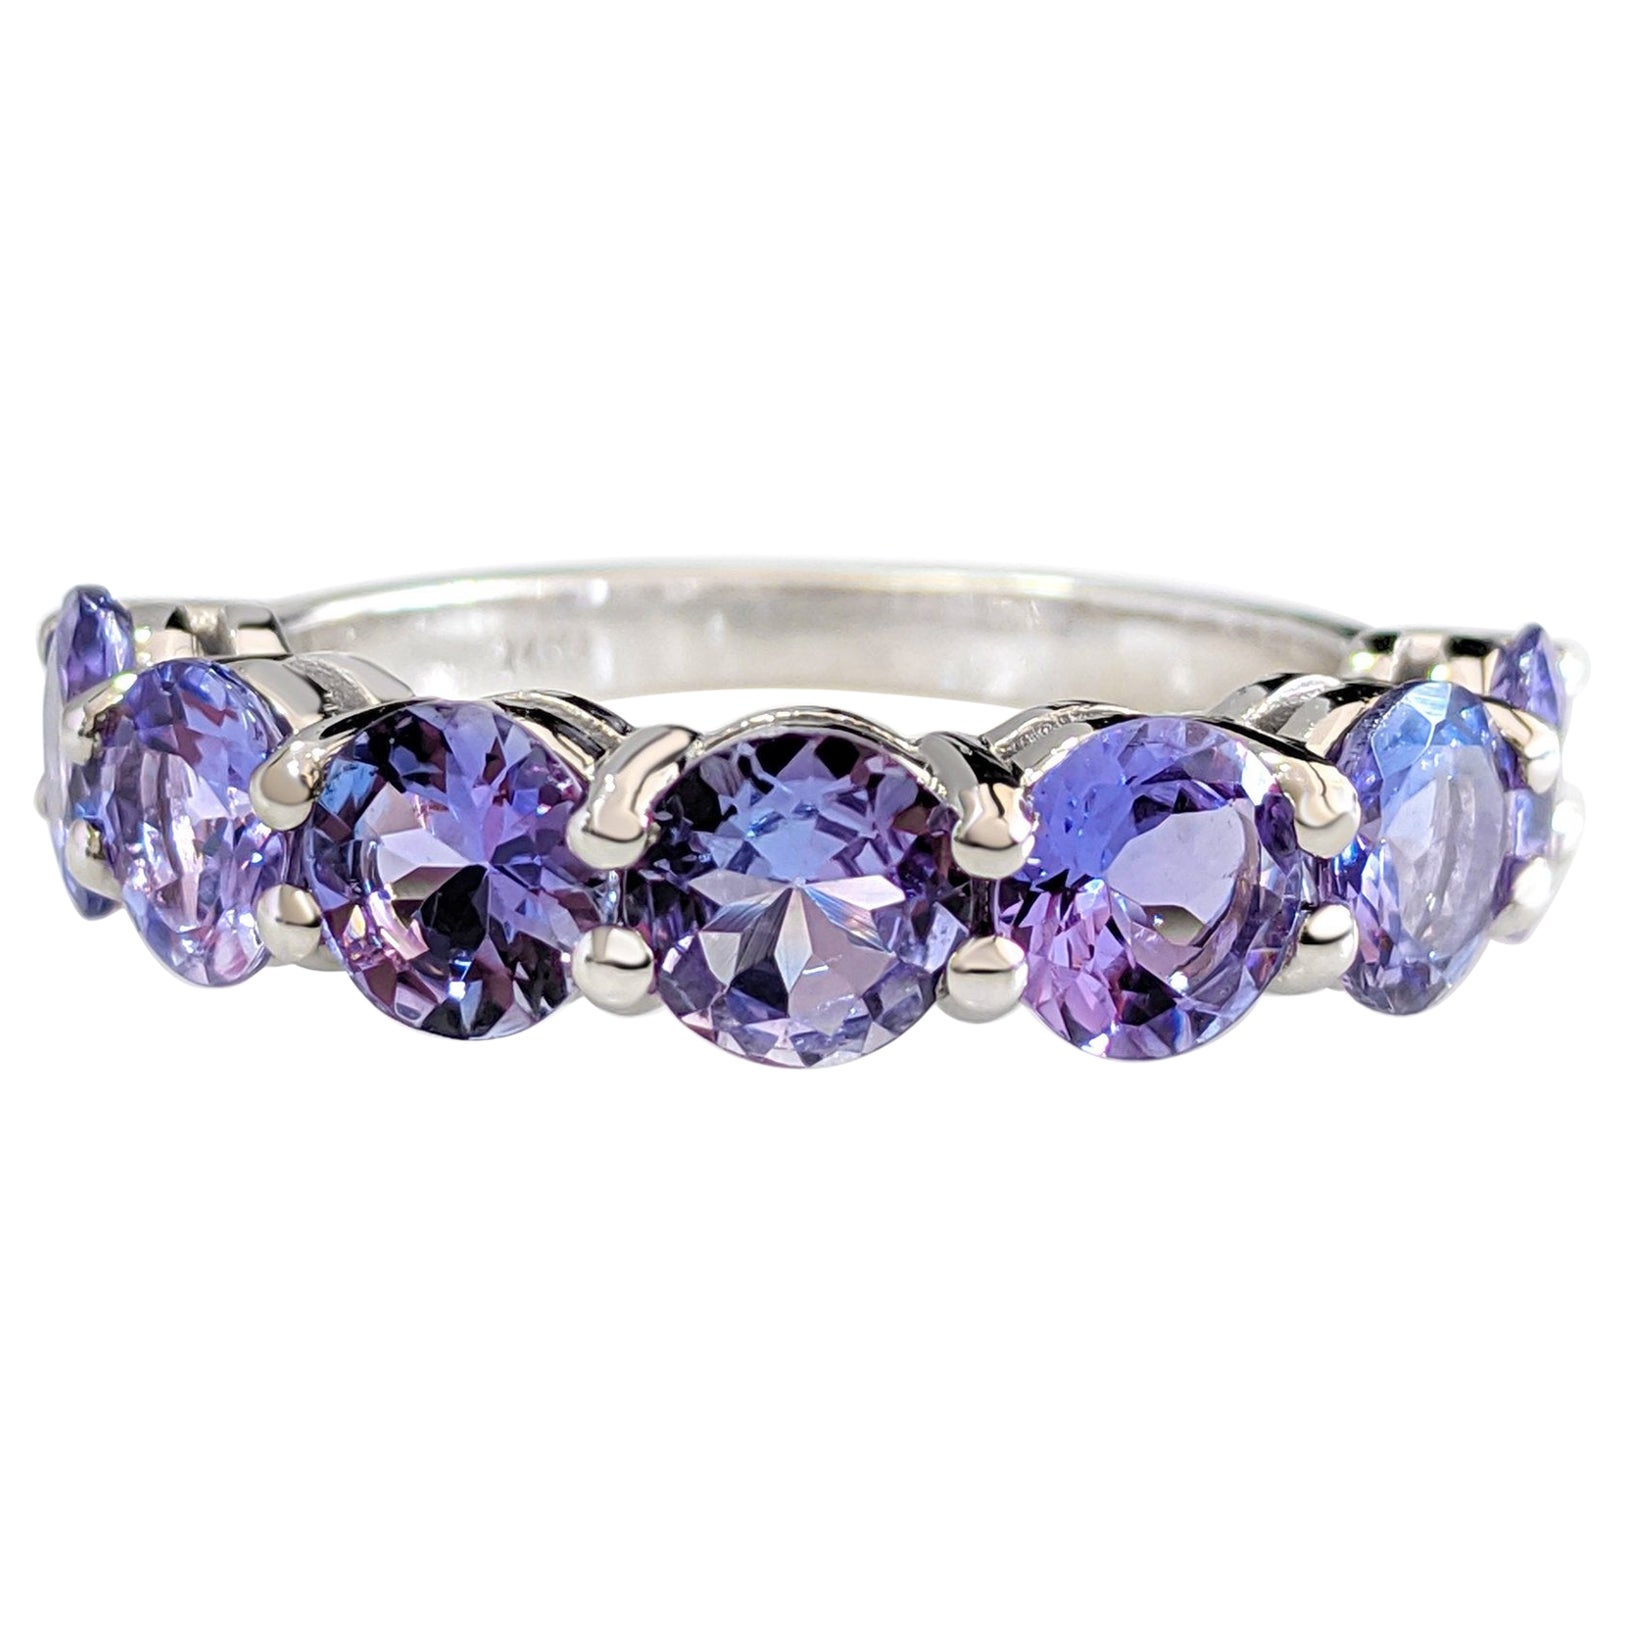 NO RESERVE! 3.18 Carat Tanzanite 7 Stone Eternity Band 14kt White gold - Ring For Sale